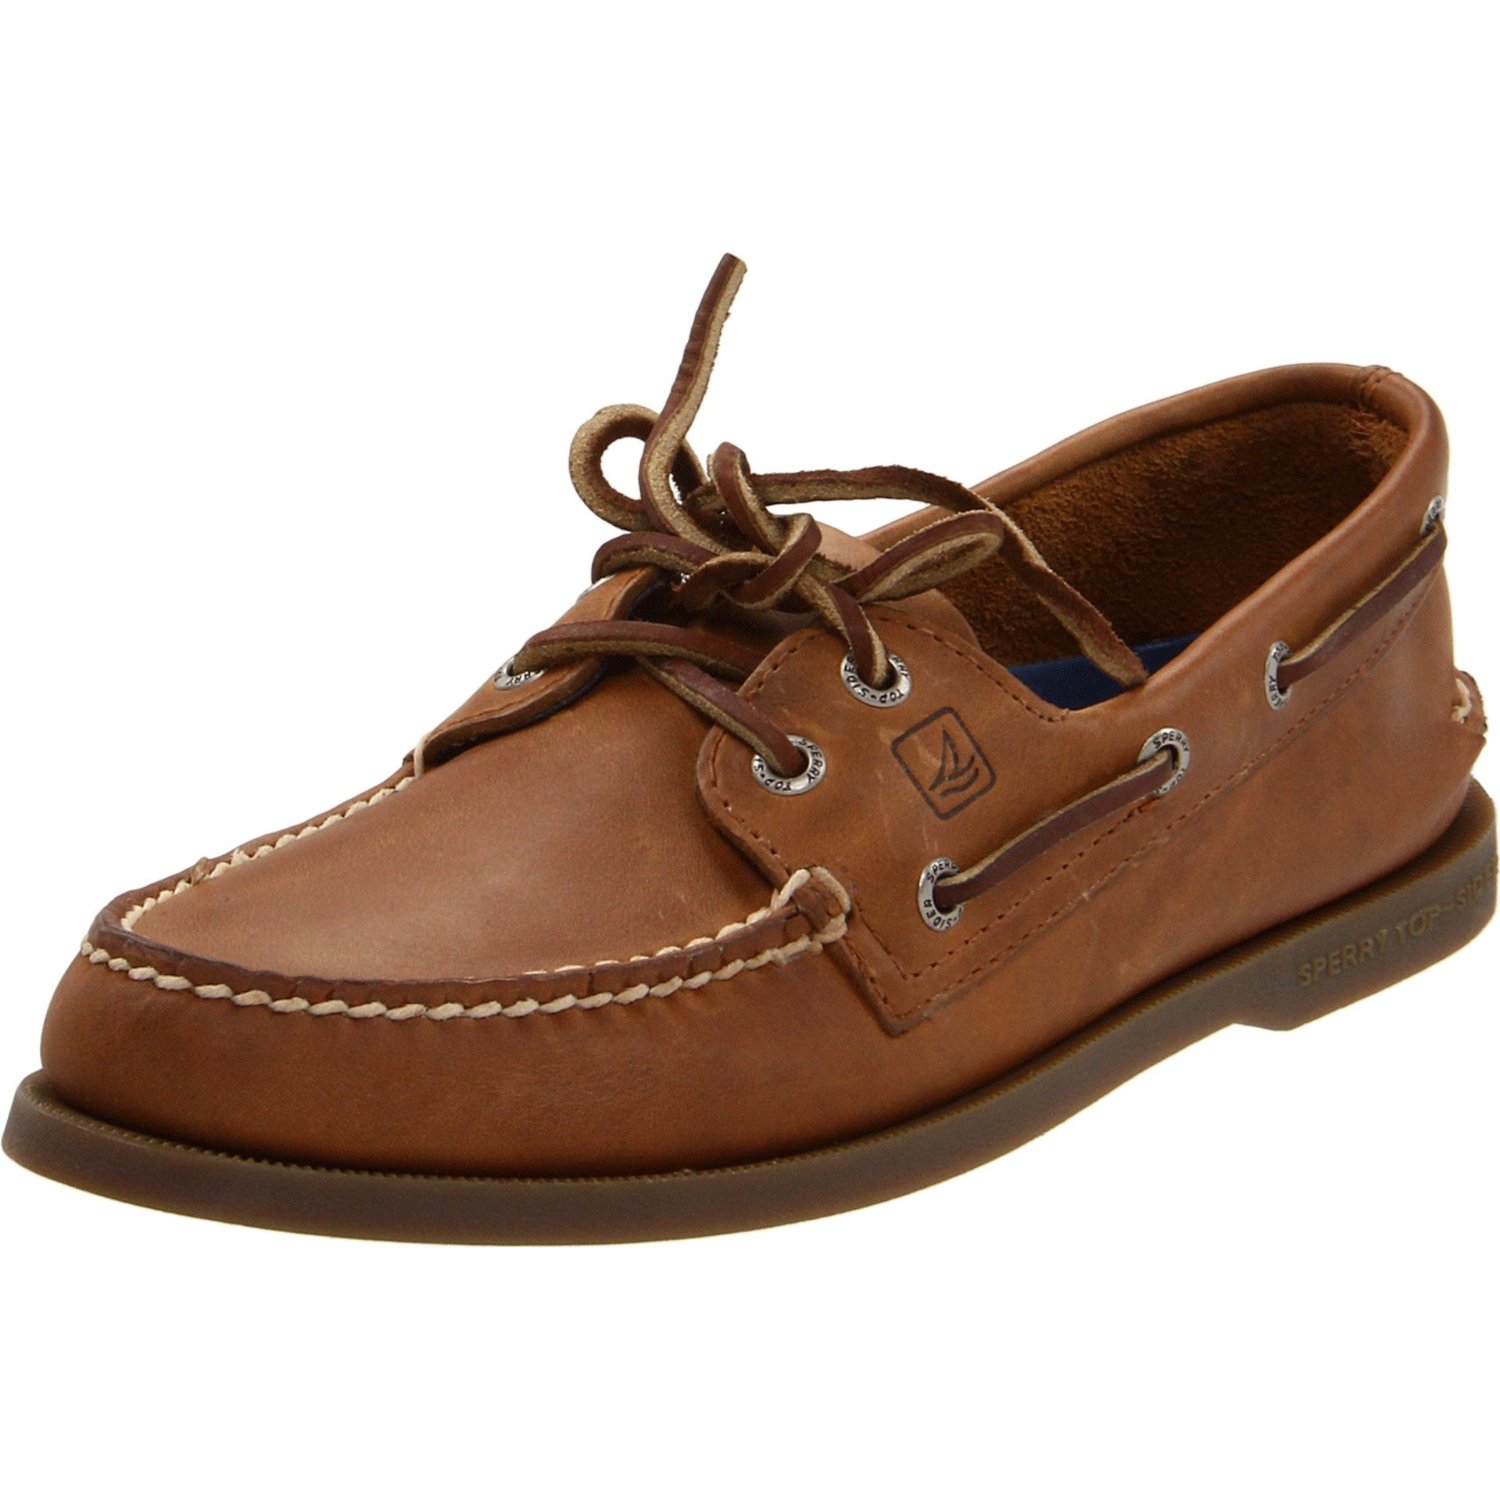 Sperry Top-sider Mens Authentic Original 2 Eye Boat Shoe in Brown for